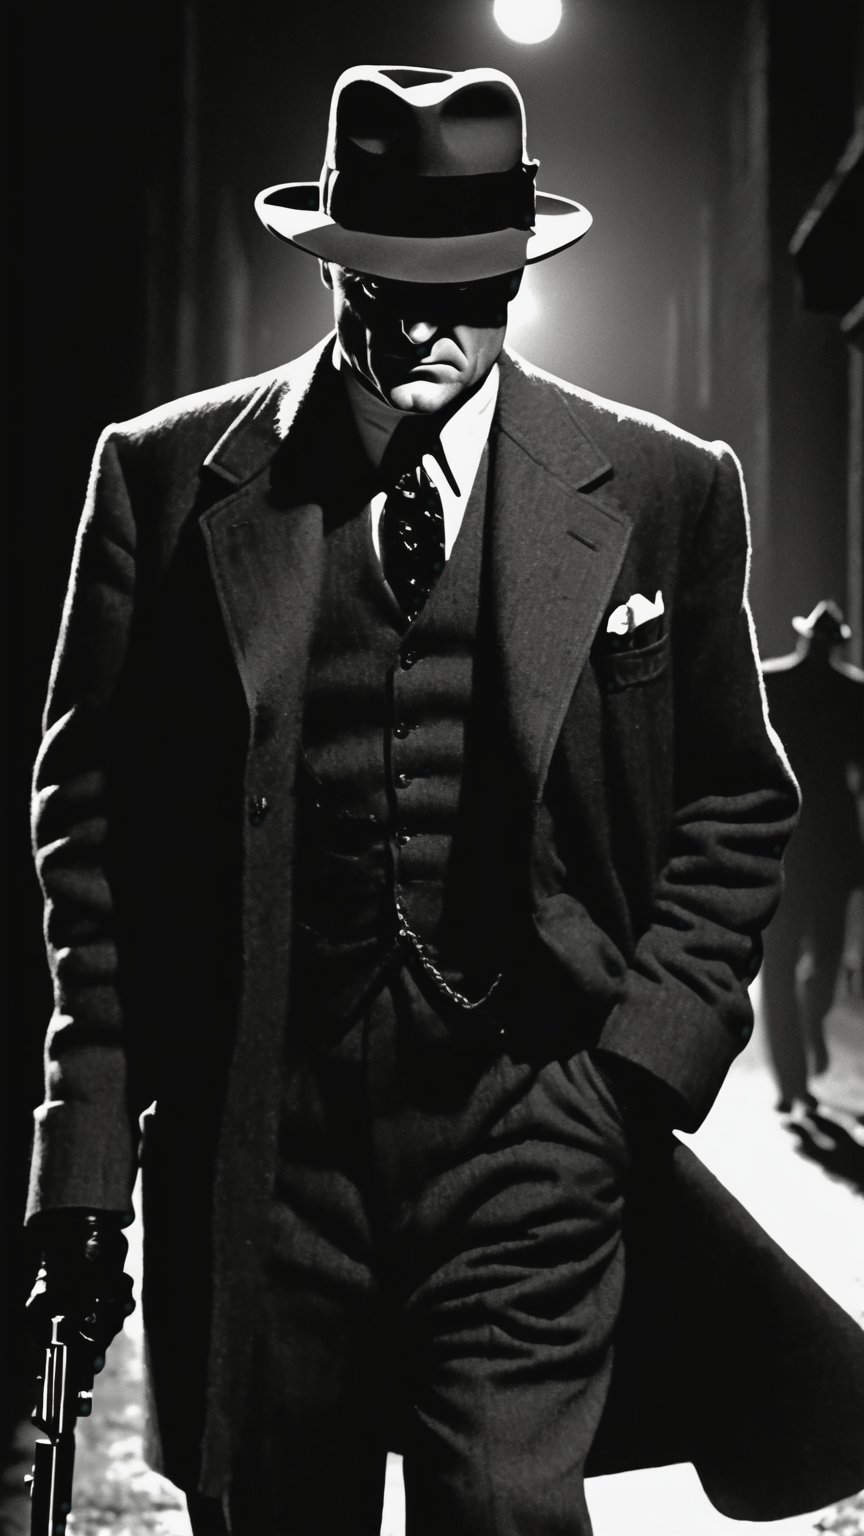 Macro script quality, ultra realistic,HD, HQ, 4K, 8K, high details, full body shot, hand guns, futuristic, sci-fi, perfect face, Monochromatic illustration, film noir art, stark lighting, 1930's Chicago gangster in the style of James Cagney wearing an expensive suit and hat moves in the shadows of a dark alley at night, cynical hero, extreme suspense, high contrast shadow, face and body half in shadow, profile, moonlight through volumetric mist, man on the run, vigilante